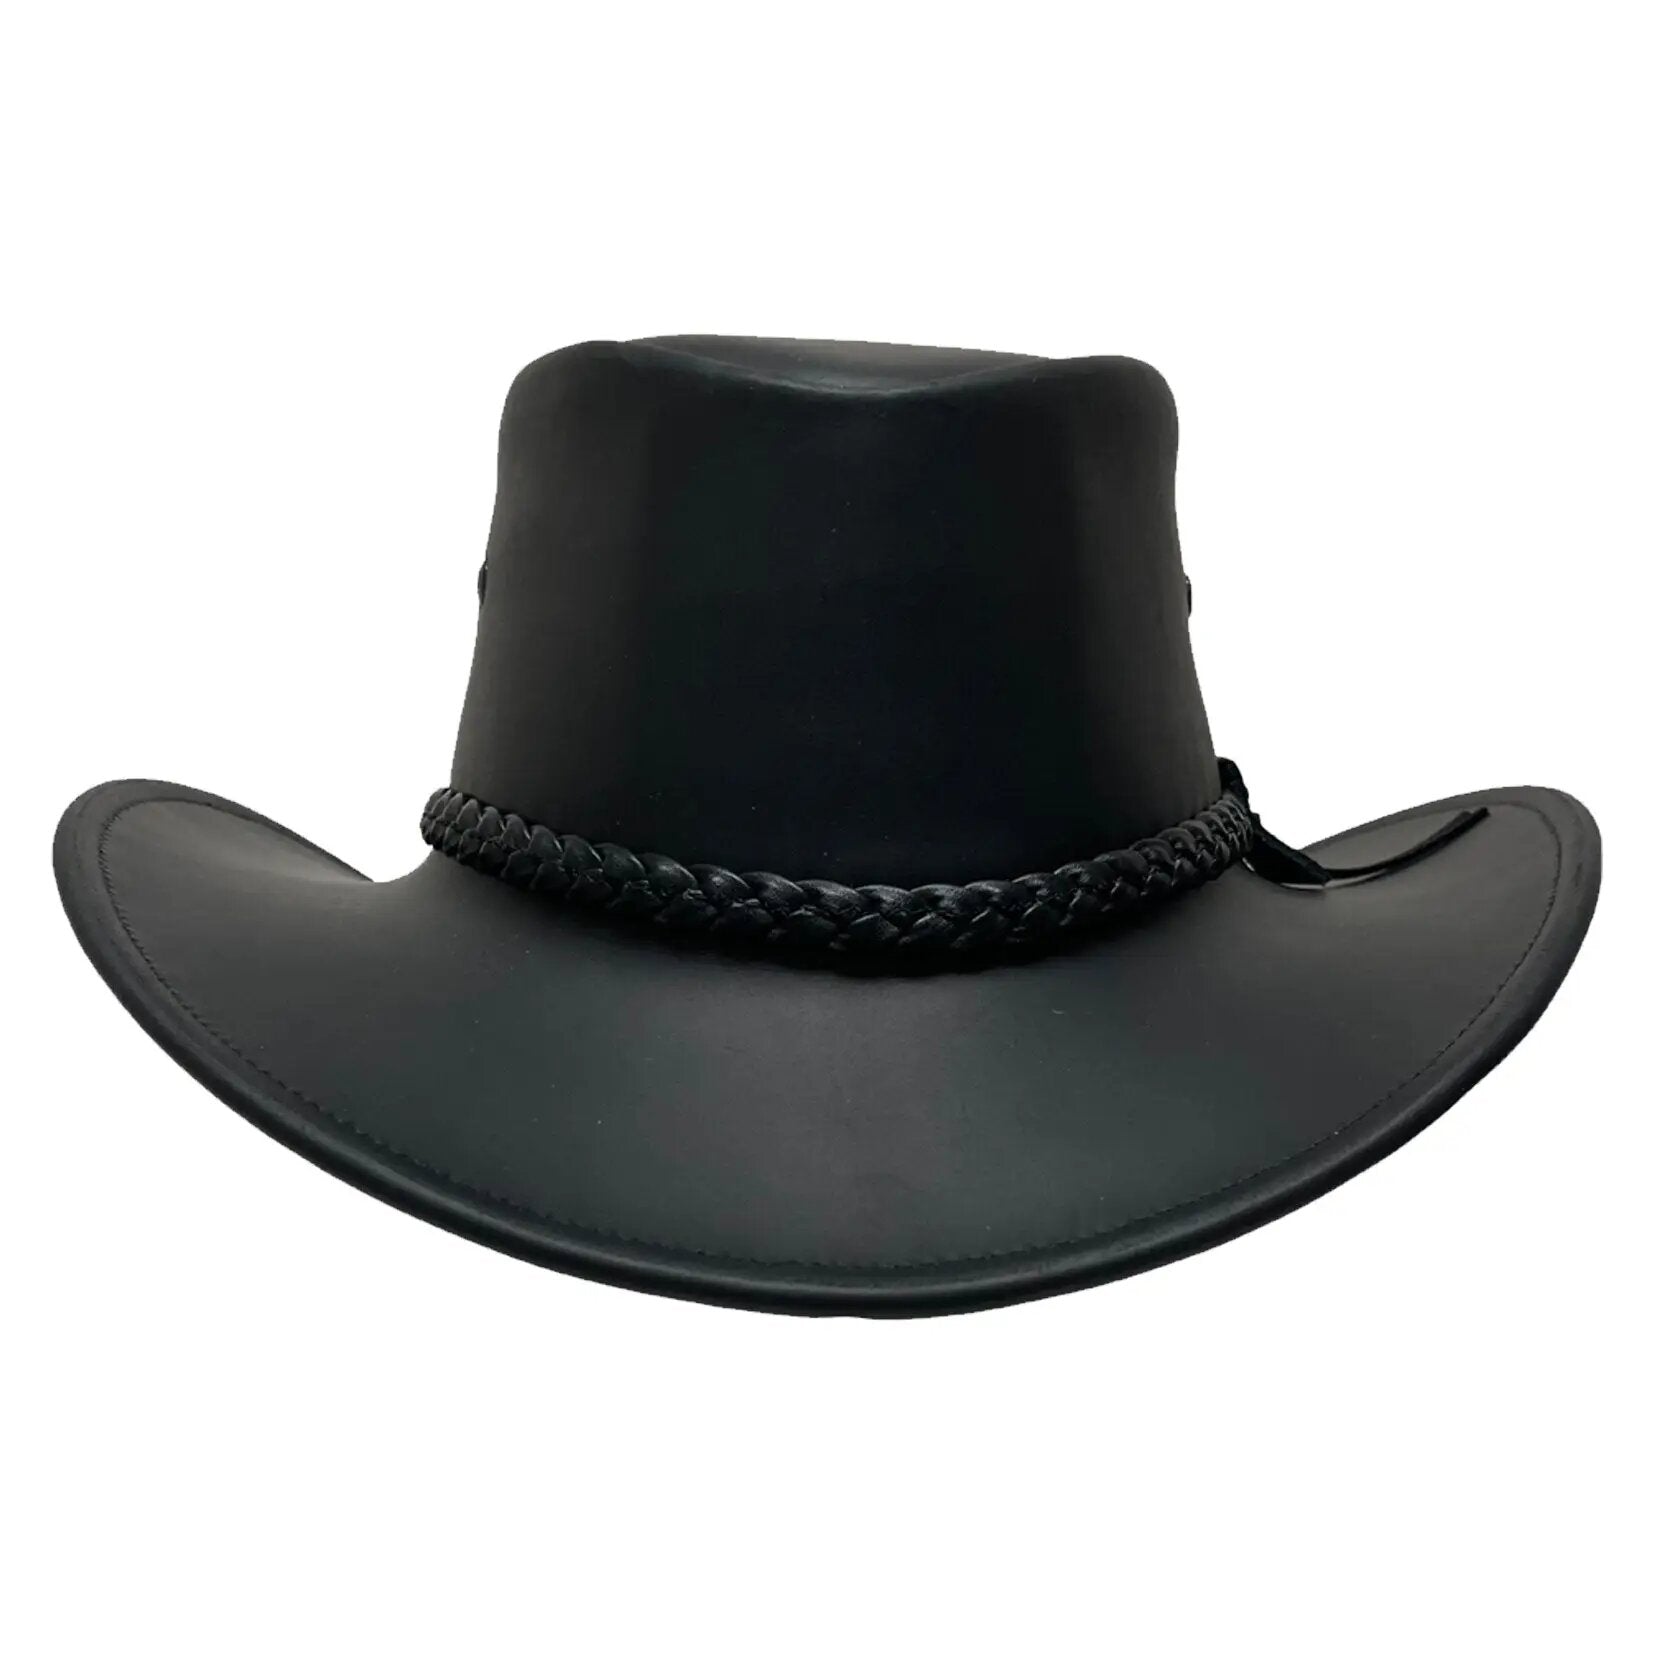 Dundee | Leather Outback Hat